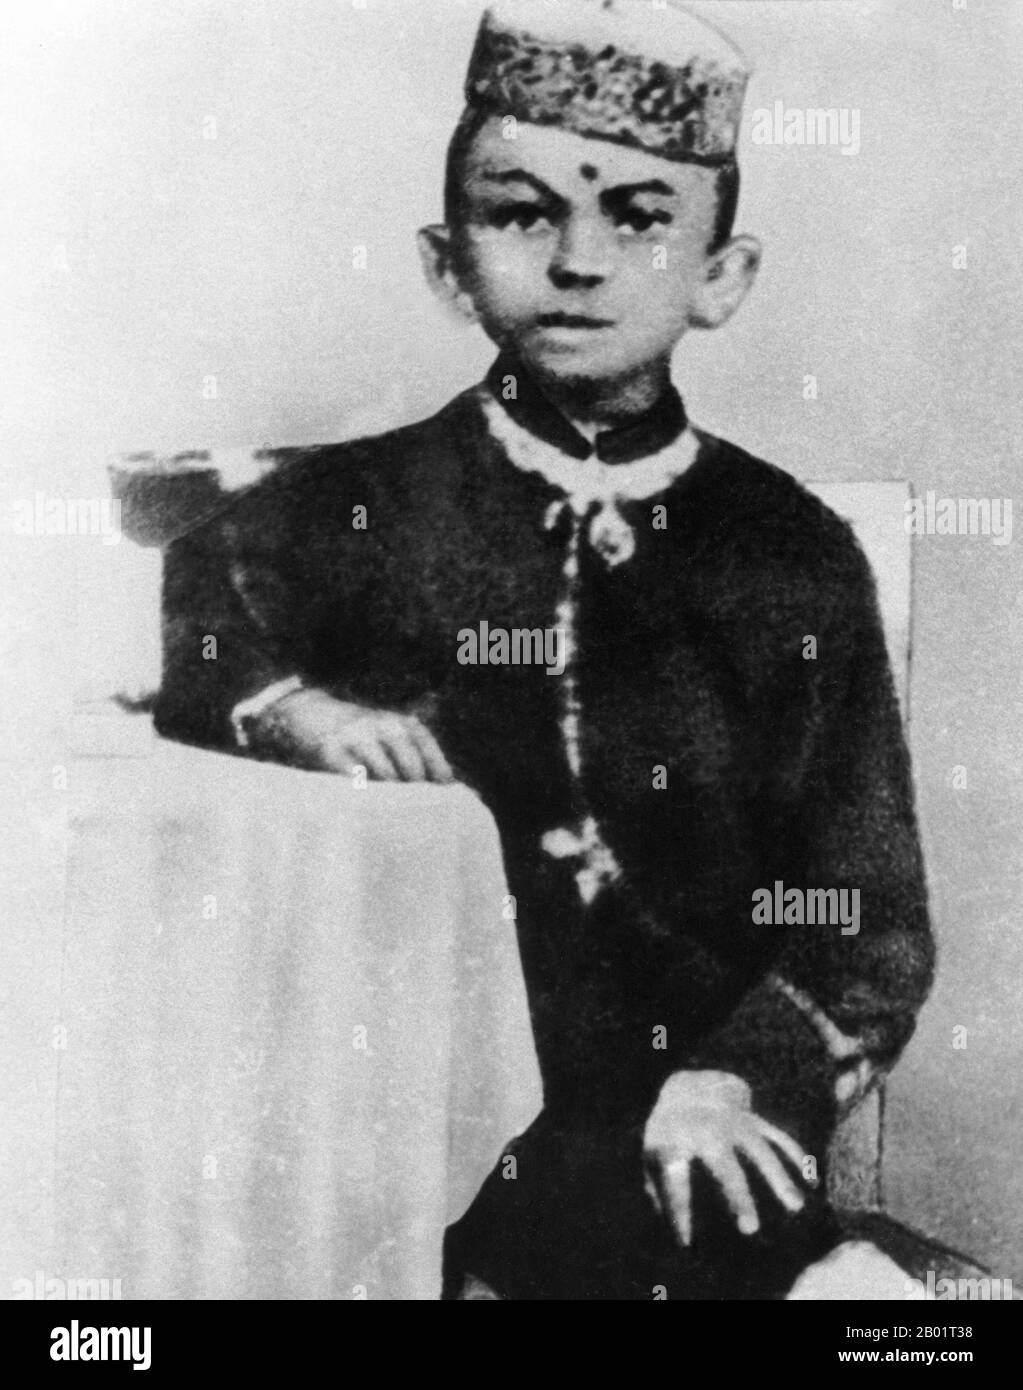 India: Mahatma Gandhi (2 October 1869 - 30 January 1948), preeminent political and ideological leader of India's independence movement, as a child aged 7 years, 1876.  Mohandas Karamchand Gandhi was the preeminent political and ideological leader of India during the Indian independence movement. He pioneered satyagraha. This is defined as resistance to tyranny through mass civil disobedience, a philosophy firmly founded upon ahimsa, or total non-violence. This concept helped India gain independence and inspired movements for civil rights and freedom across the world. Stock Photo